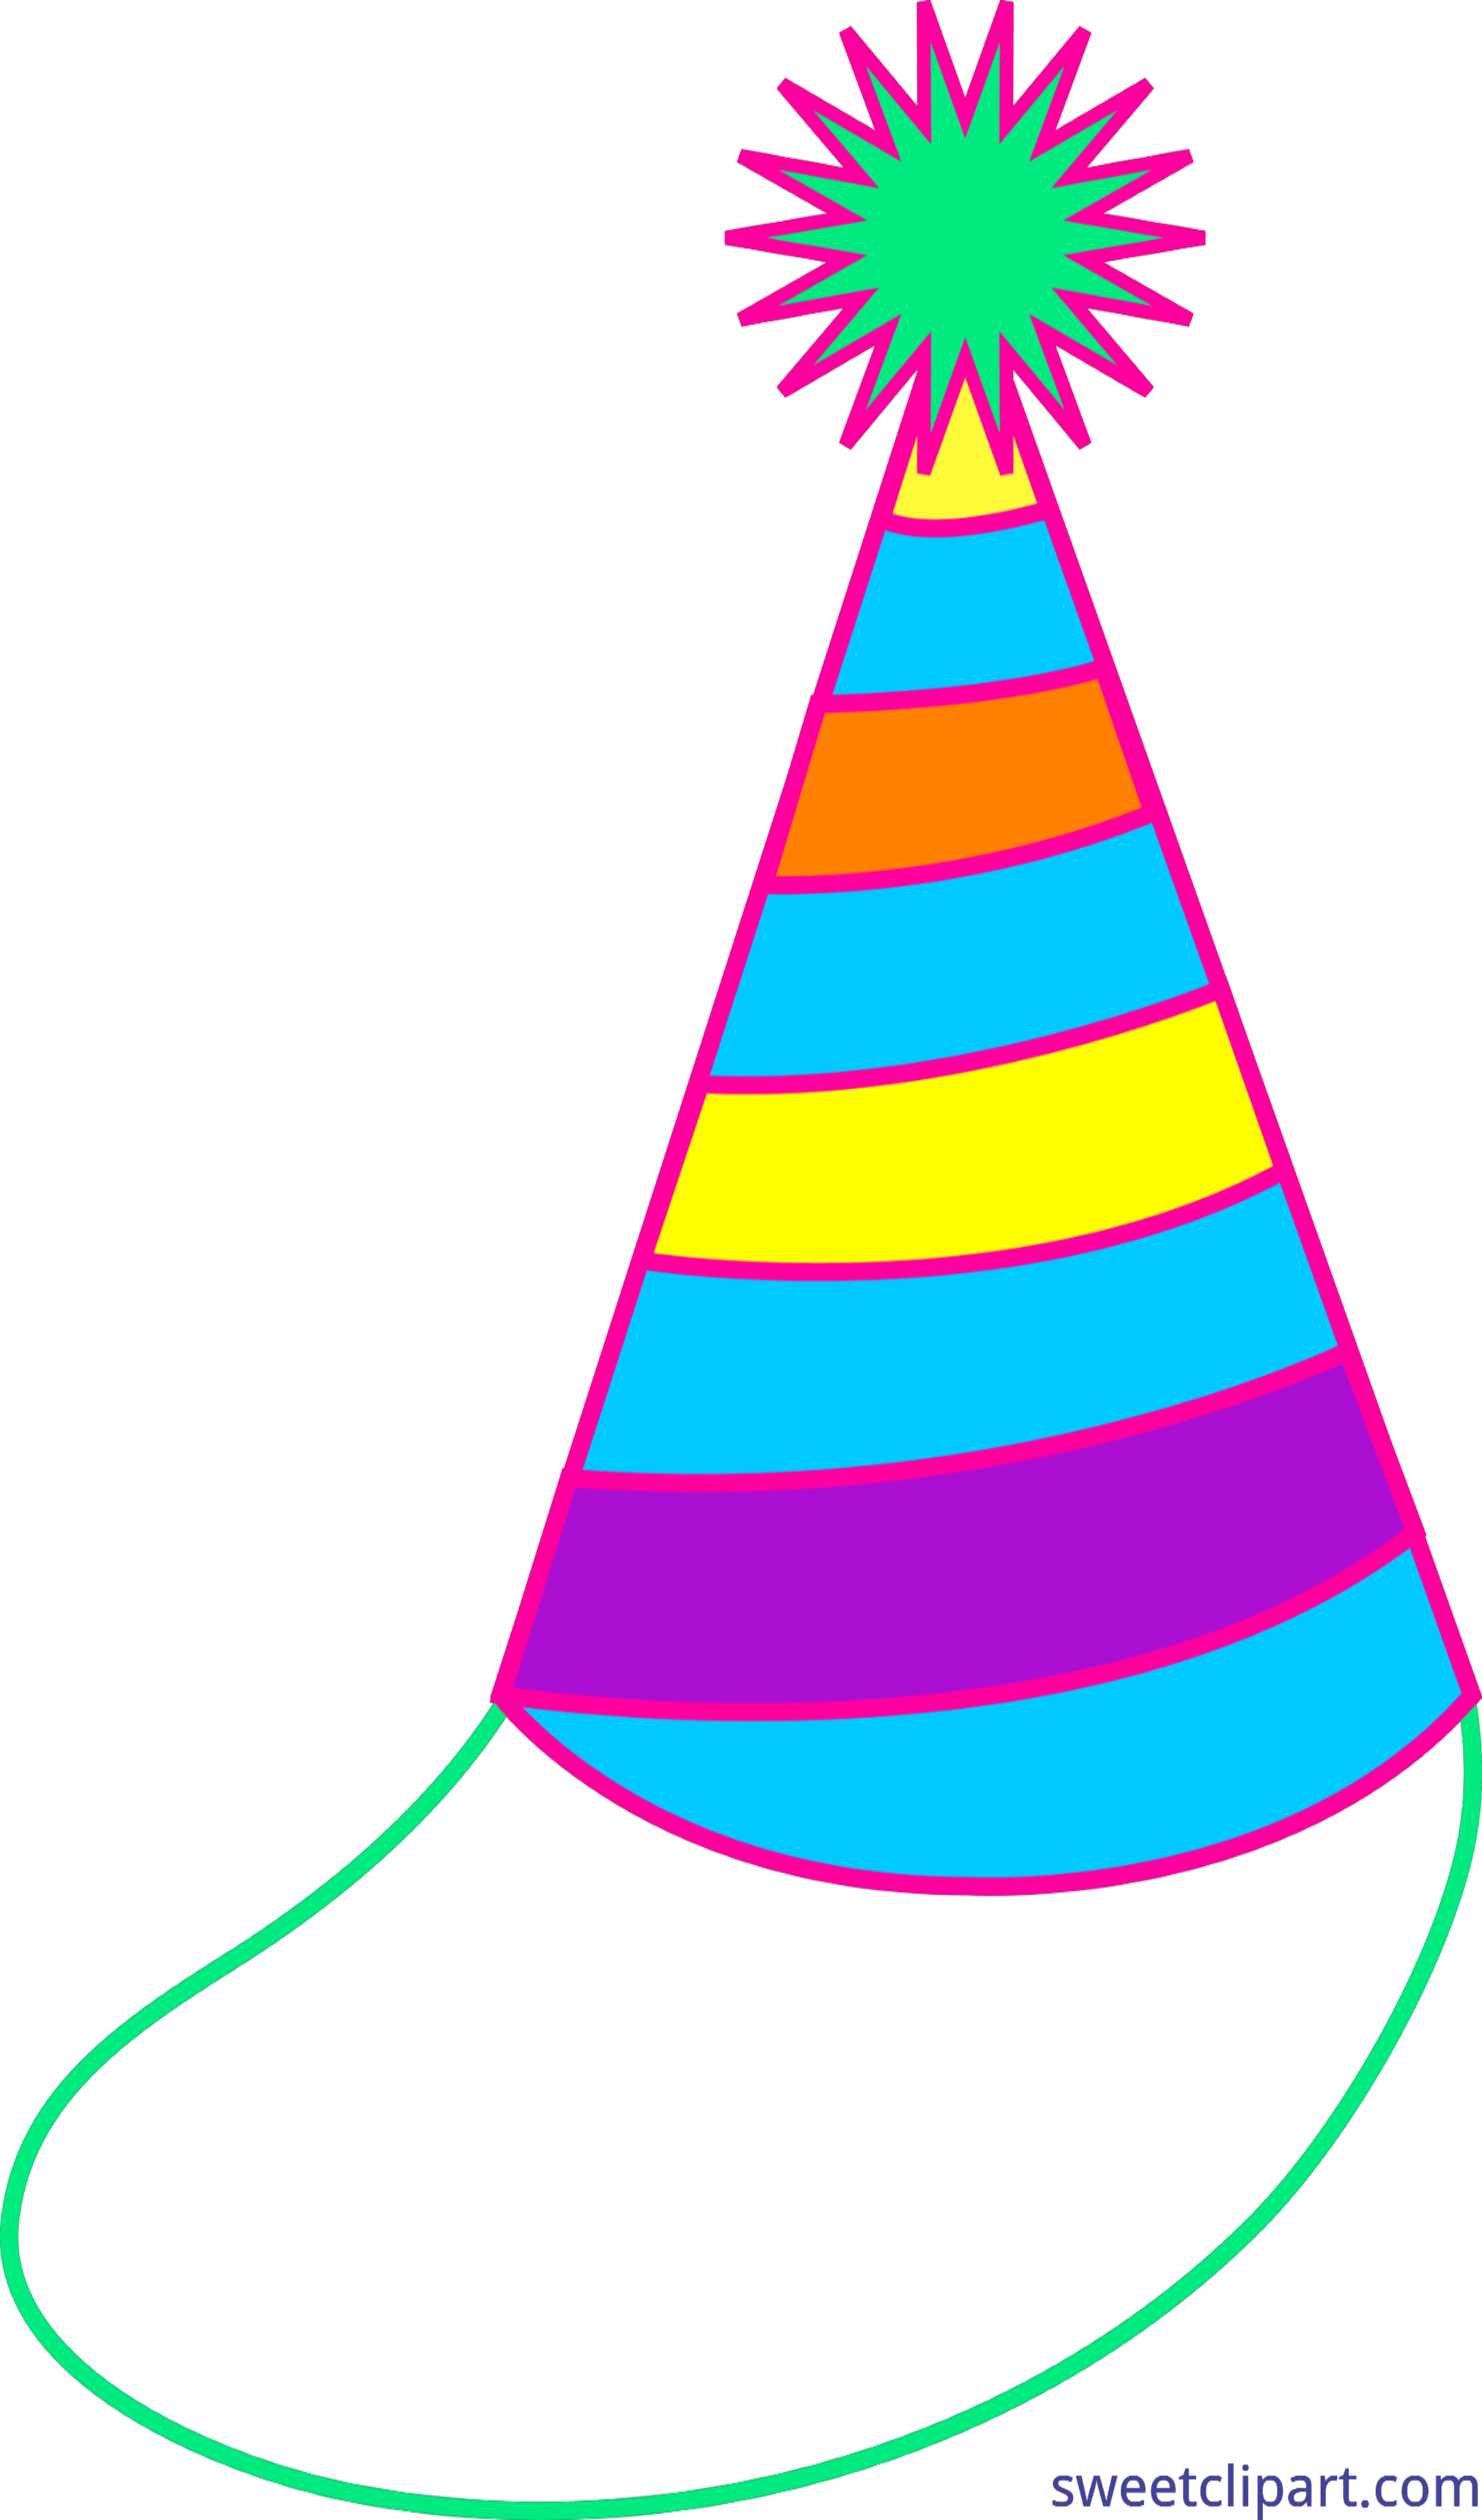 cone clipart hat